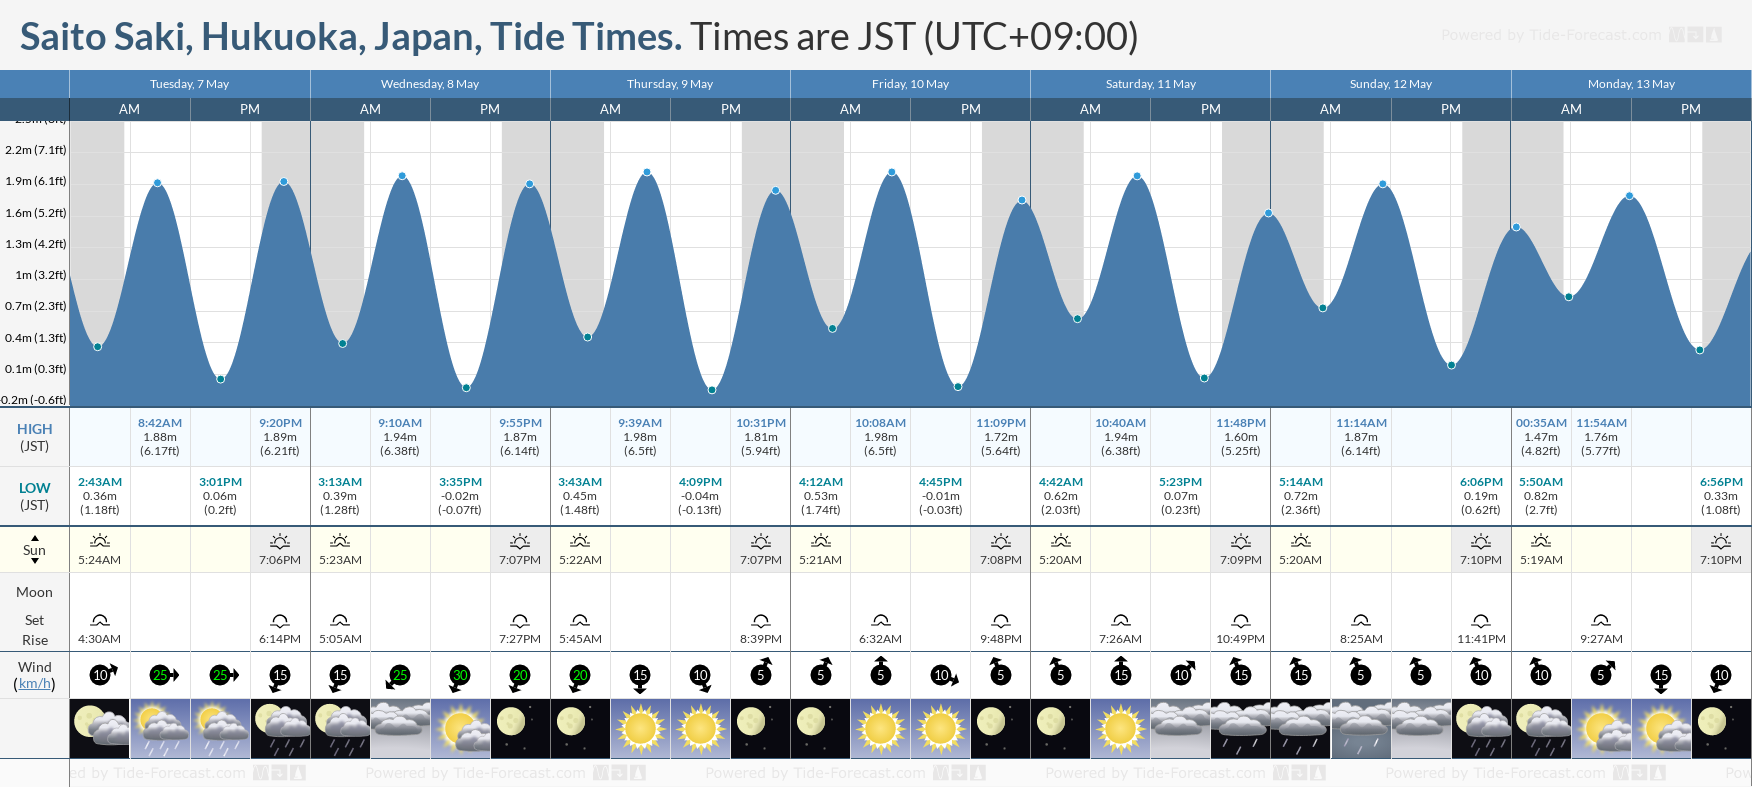 Saito Saki, Hukuoka, Japan Tide Chart including high and low tide tide times for the next 7 days